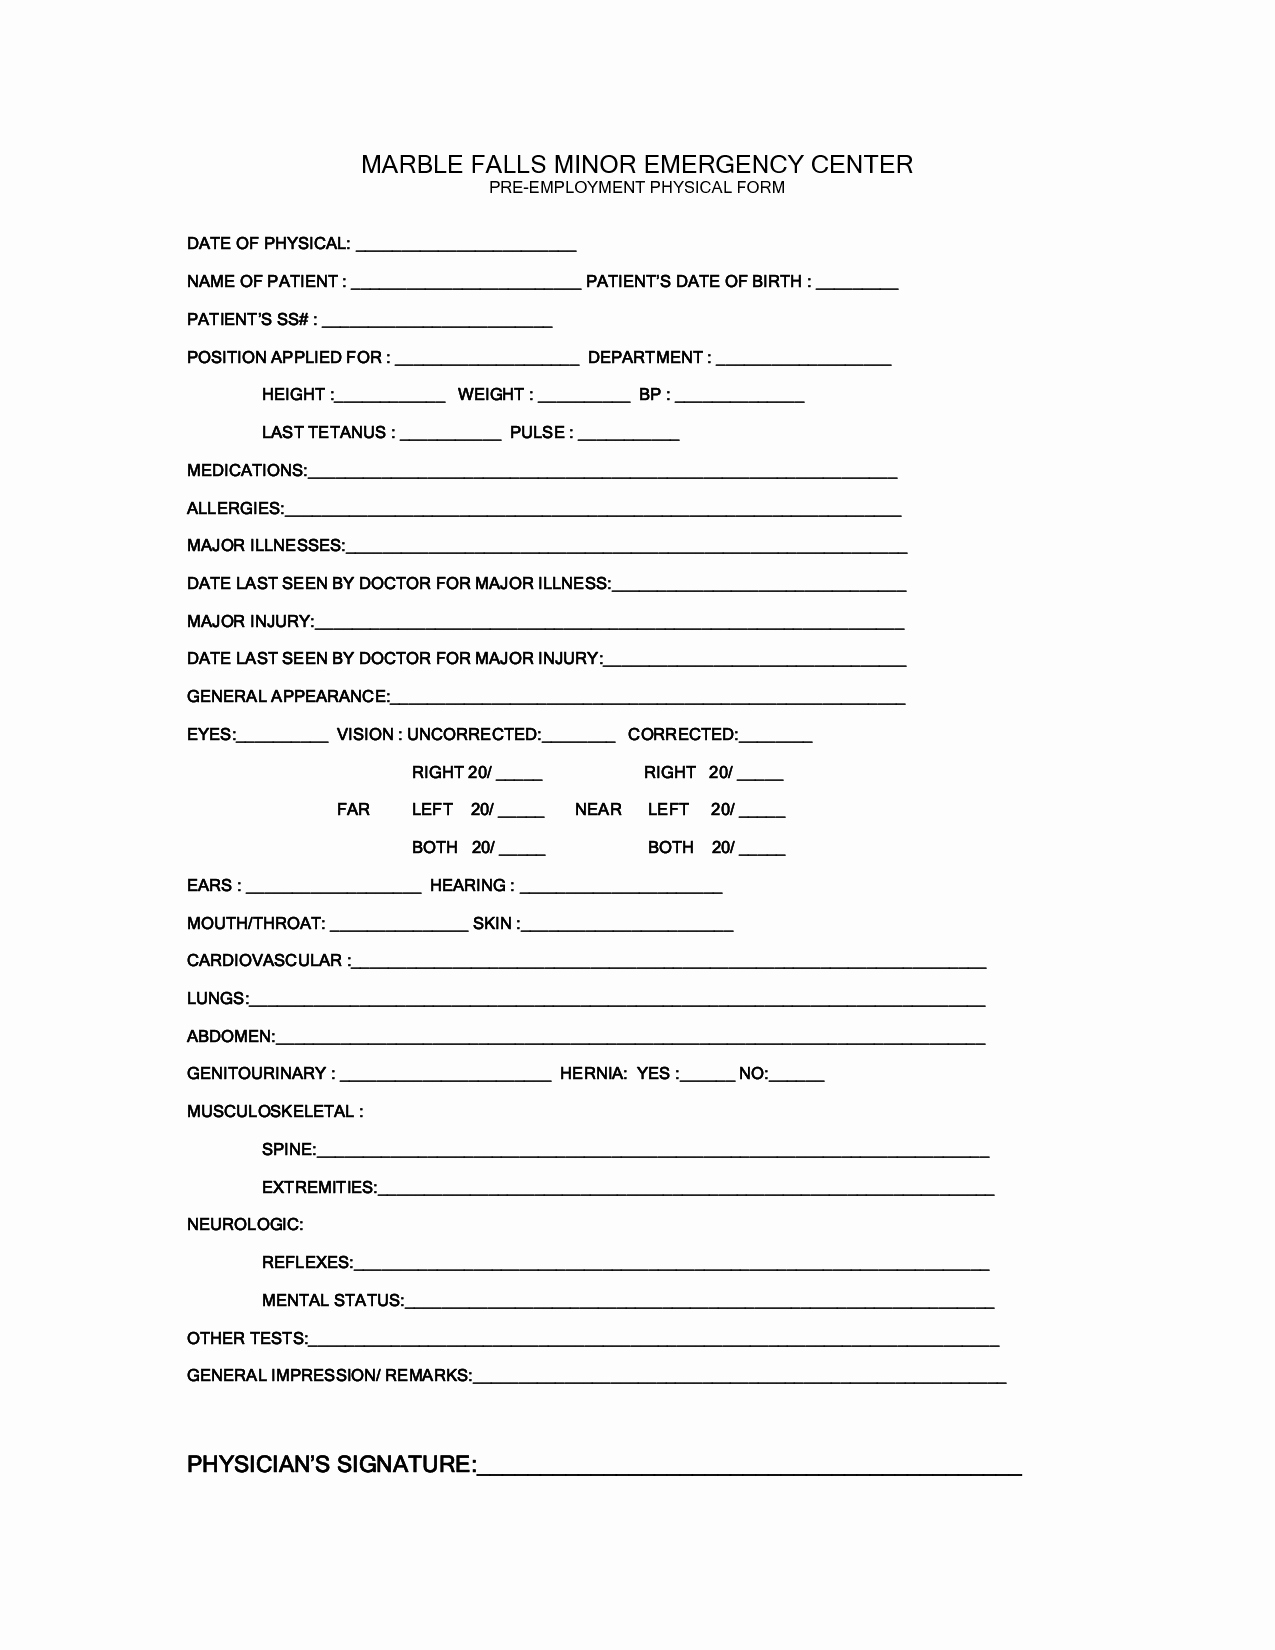 Physical Examination form Template Beautiful Work Physical Exam Blank form Bing Images